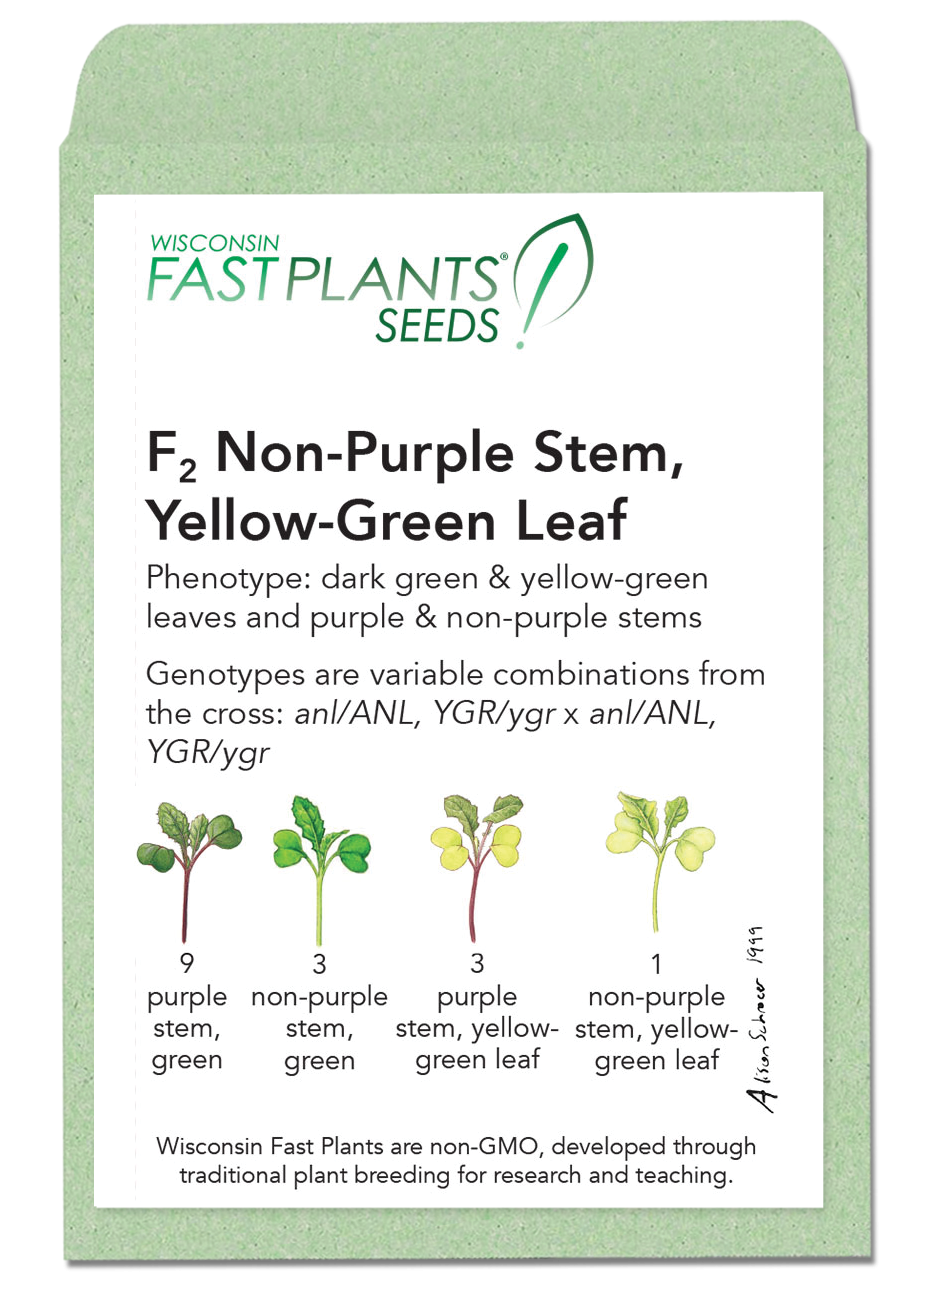 F2 Non-Purple Stem, Yellow-Green Leaf seed packet